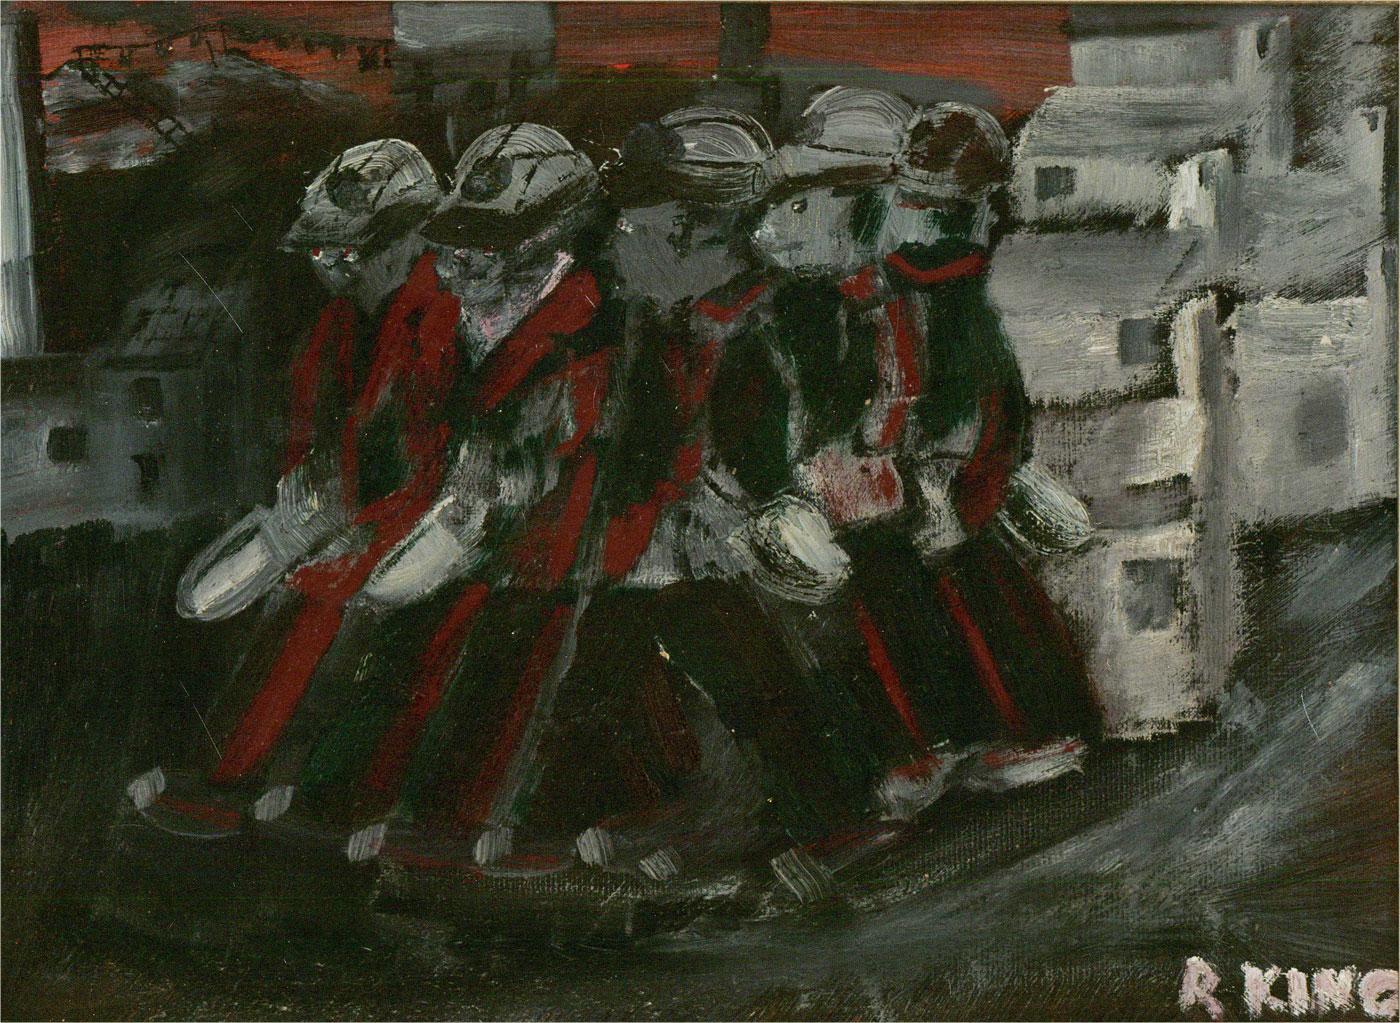 R. King - 20th Century Oil, Miners 1